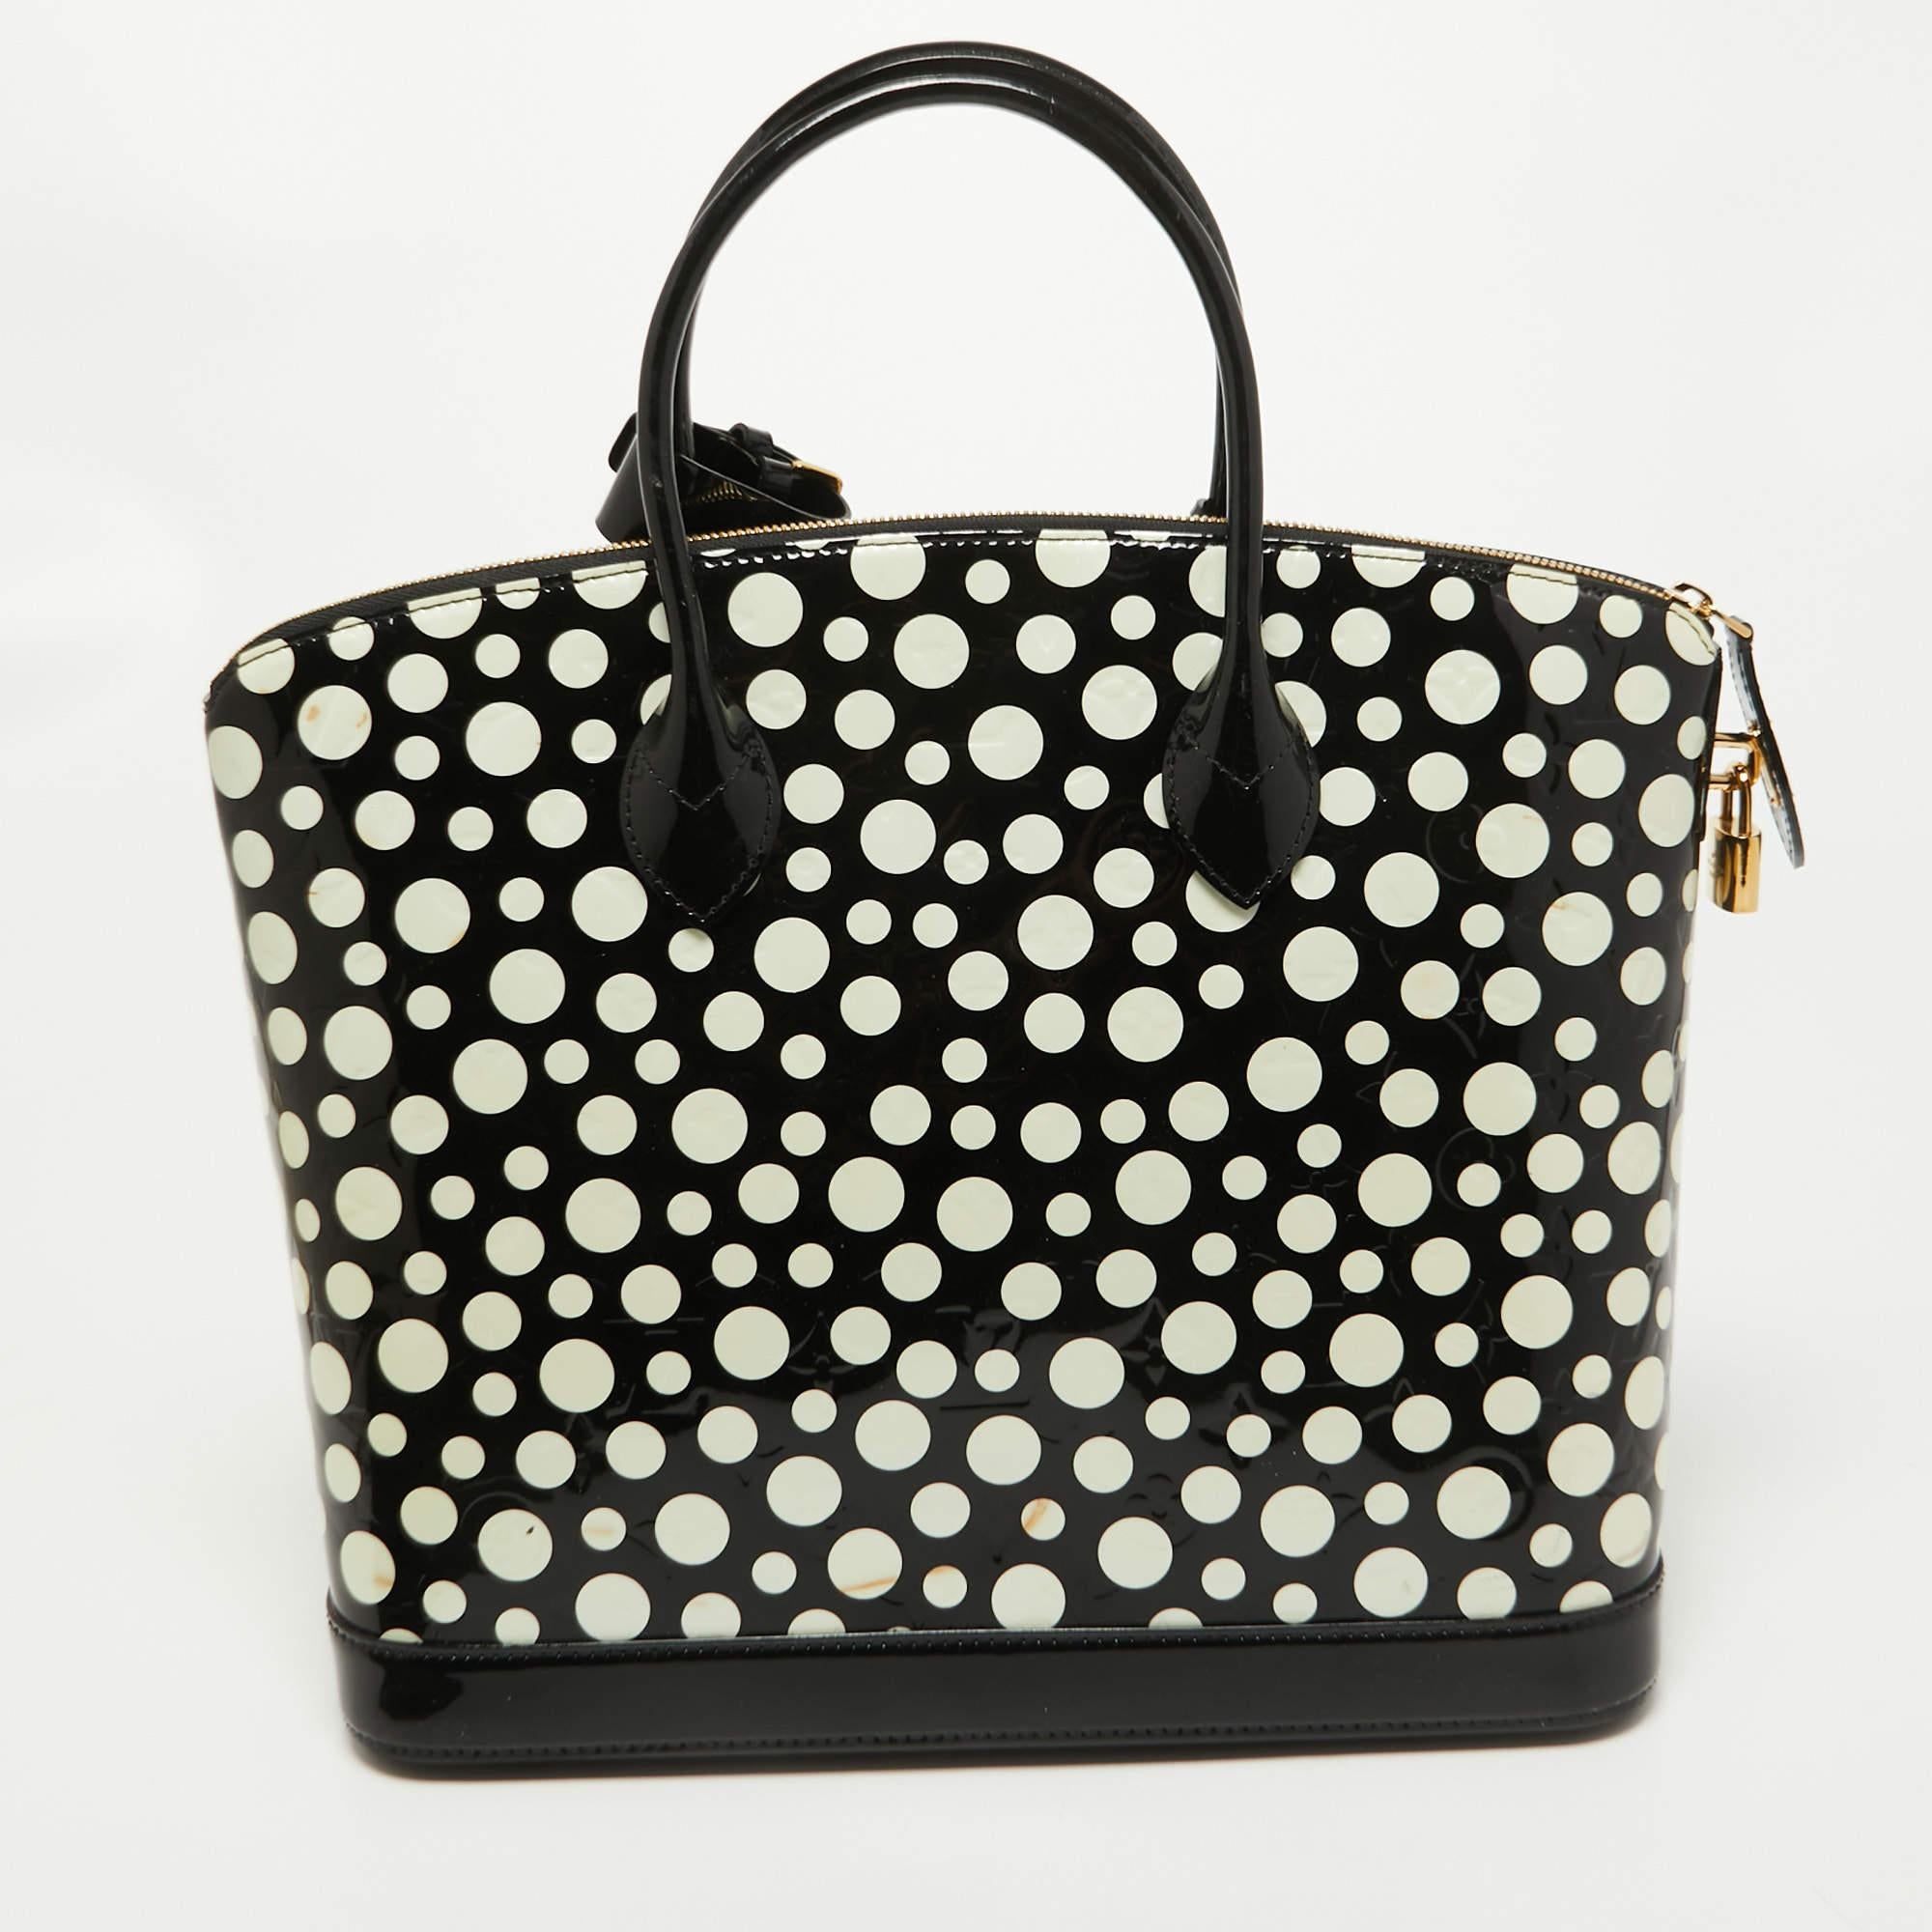 This beautiful creation from the Louis Vuitton x Yayoi Kusama collaboration is a special item sure to help you create timeless style edits every season. Crafted with quality materials, this piece will last you a long time.

Includes: Padlock & Keys,